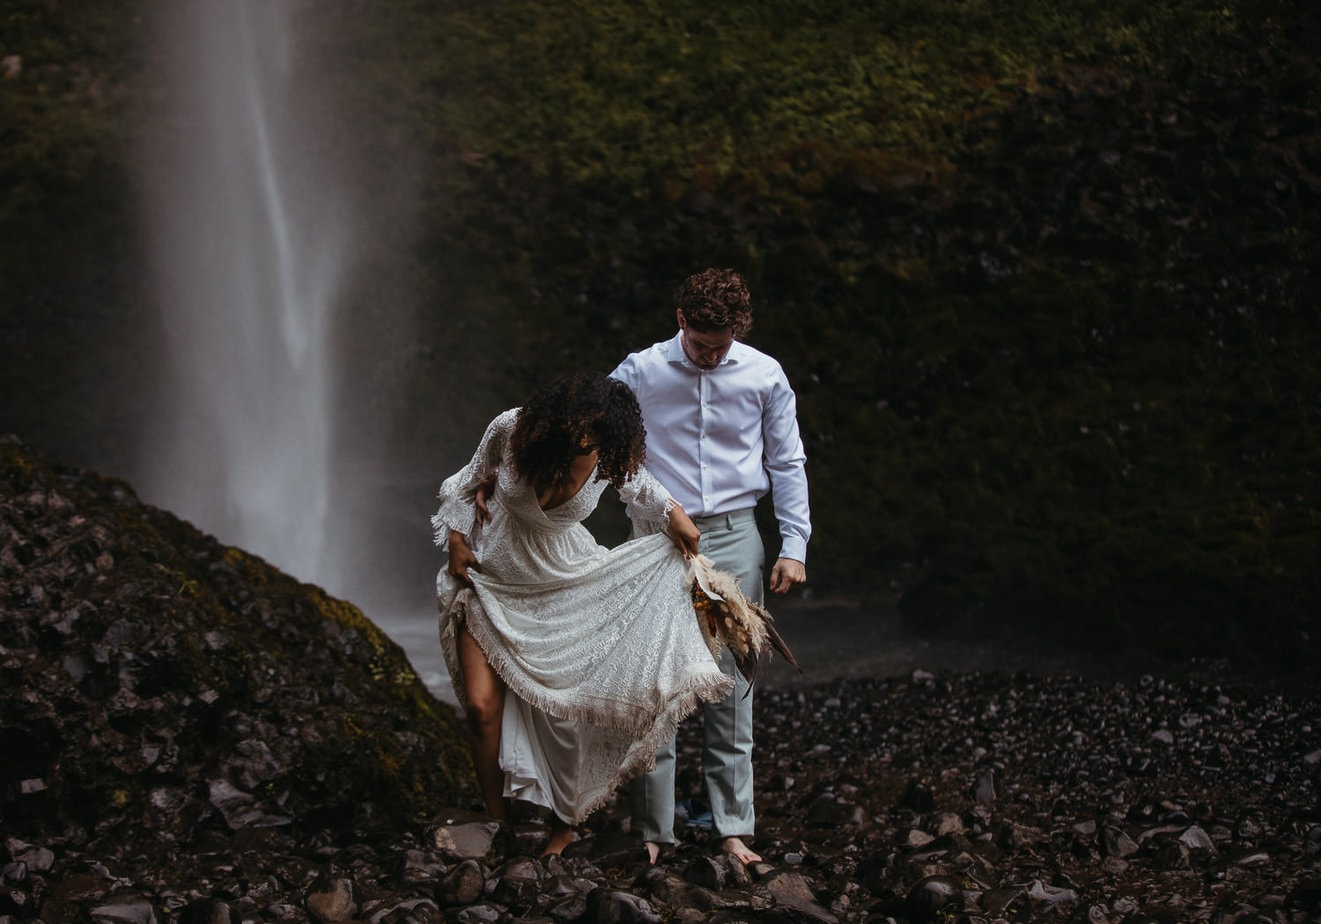 Eloping couple carefully climb over wet rocks. Bridge holds her damp dress in her hands and clutches her bouquet